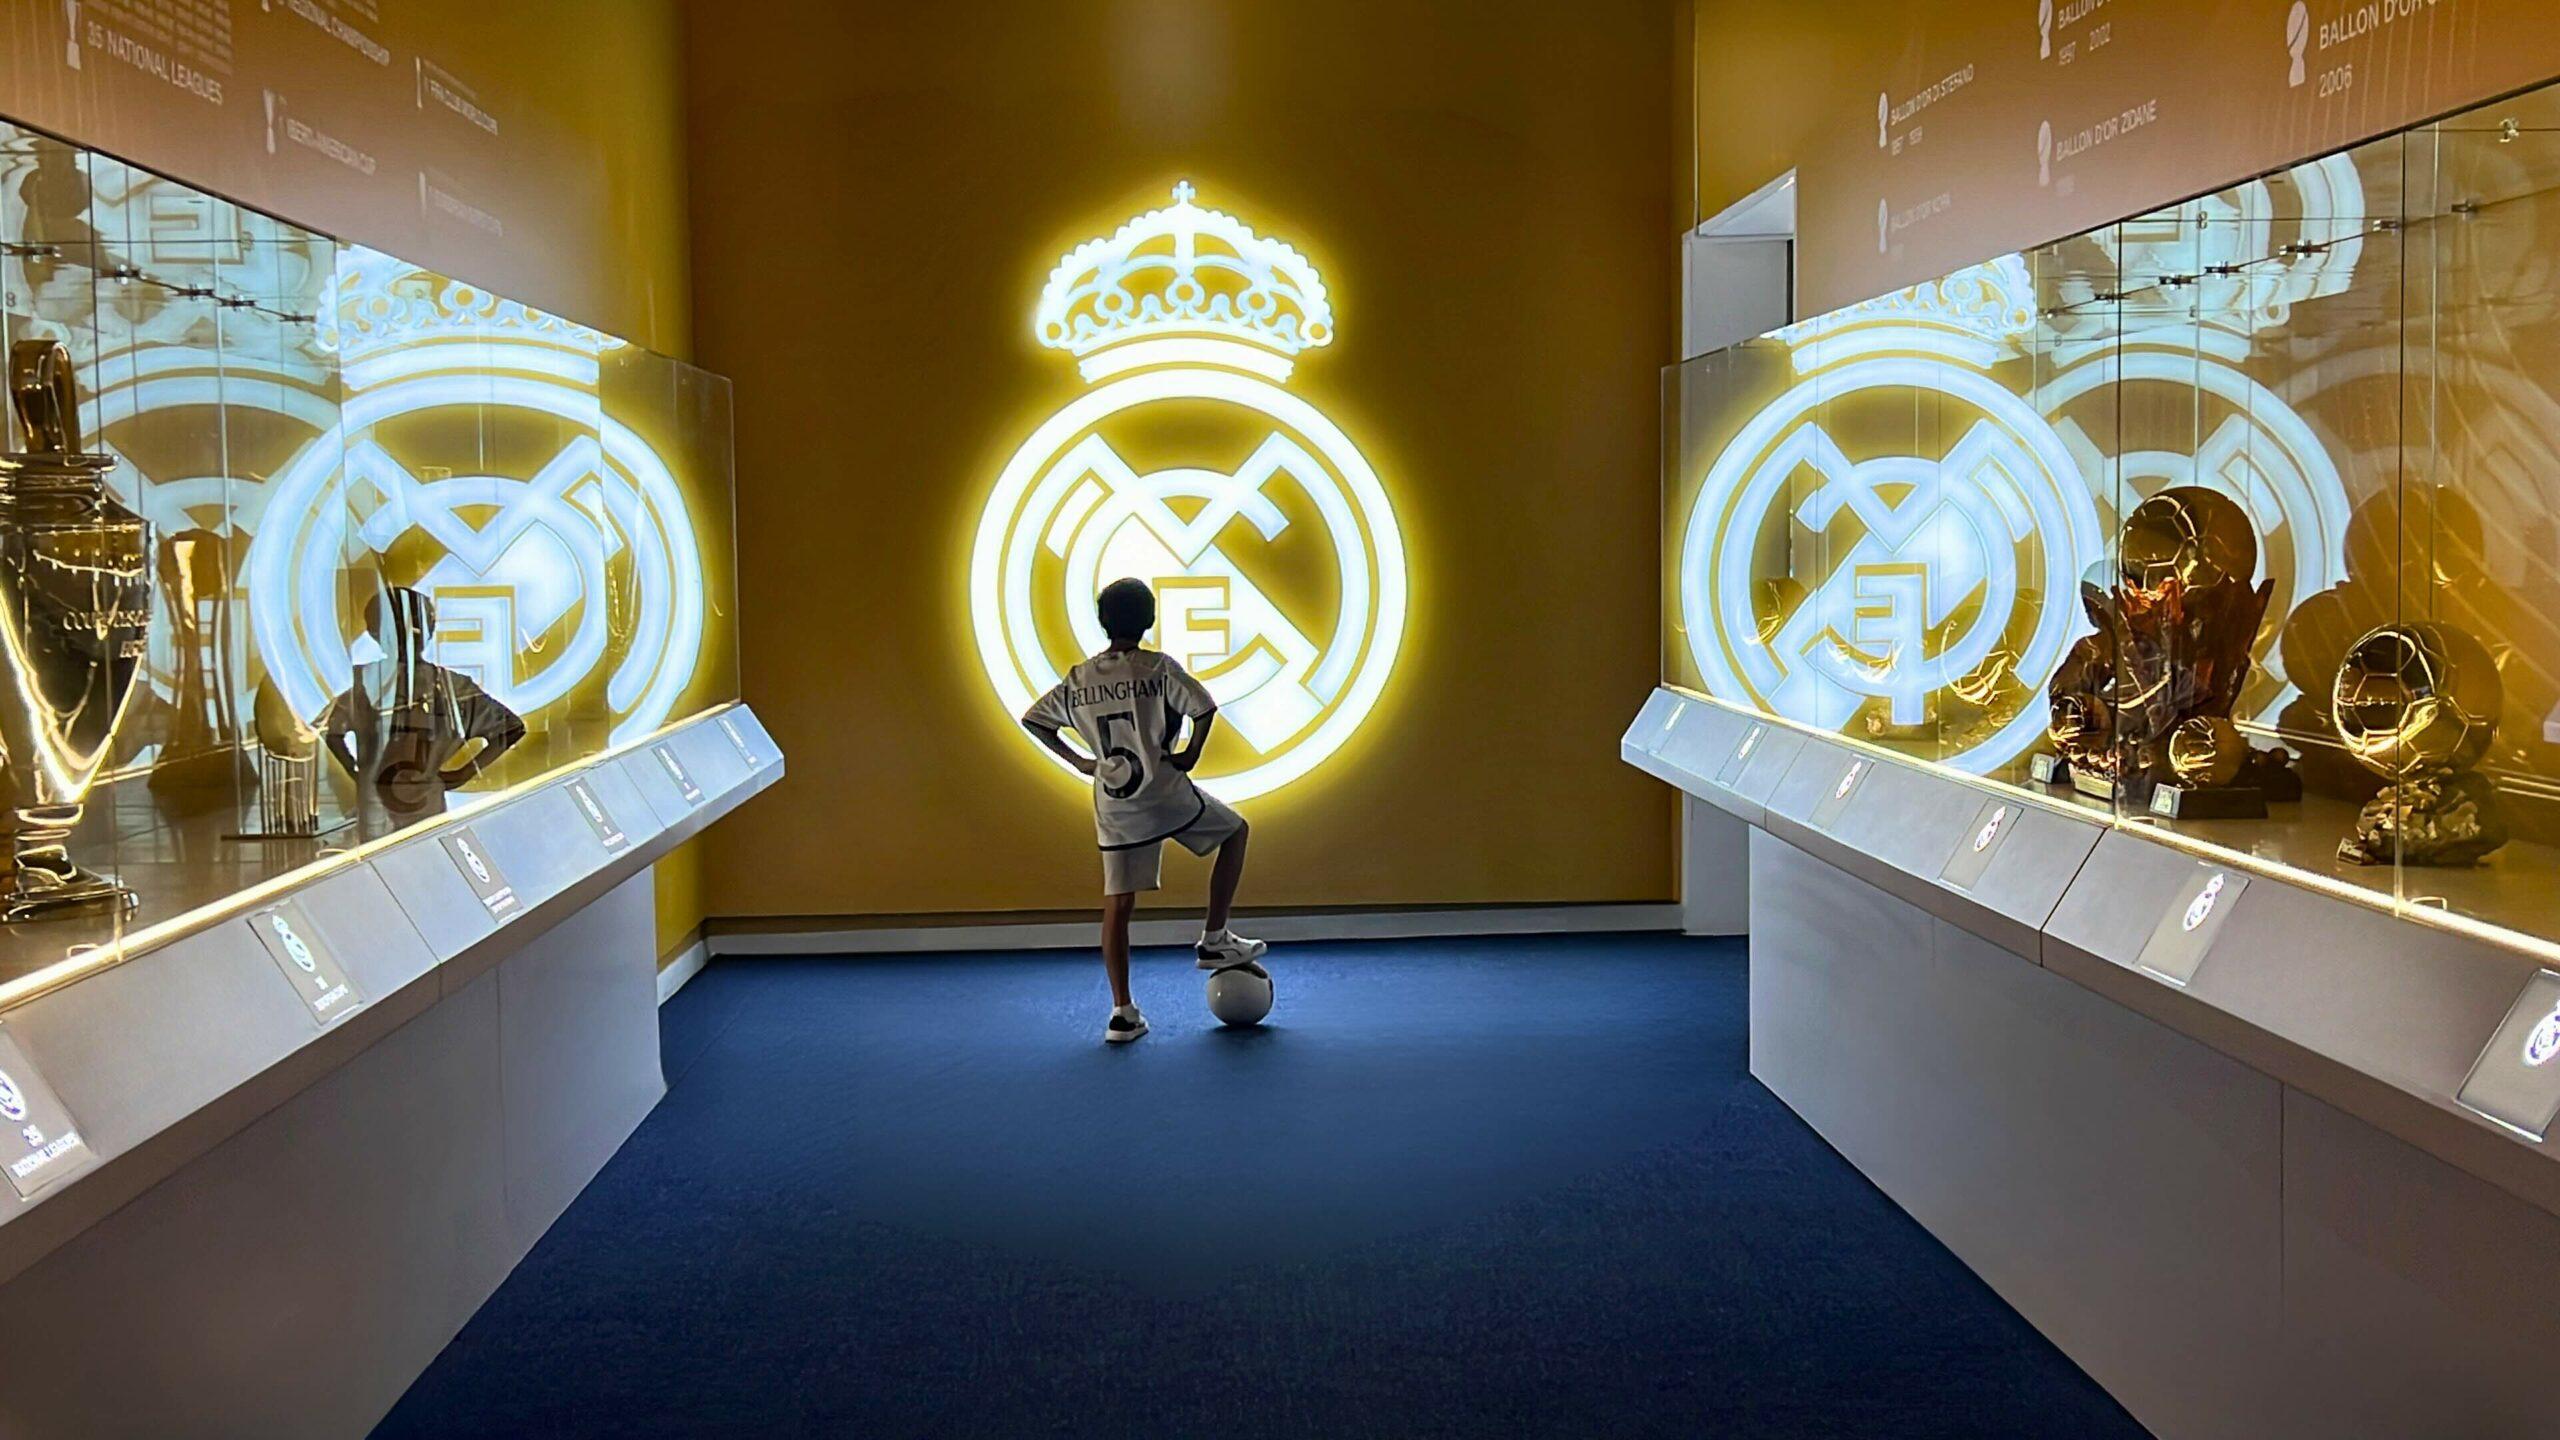 The world's first football theme park is now open in Dubai